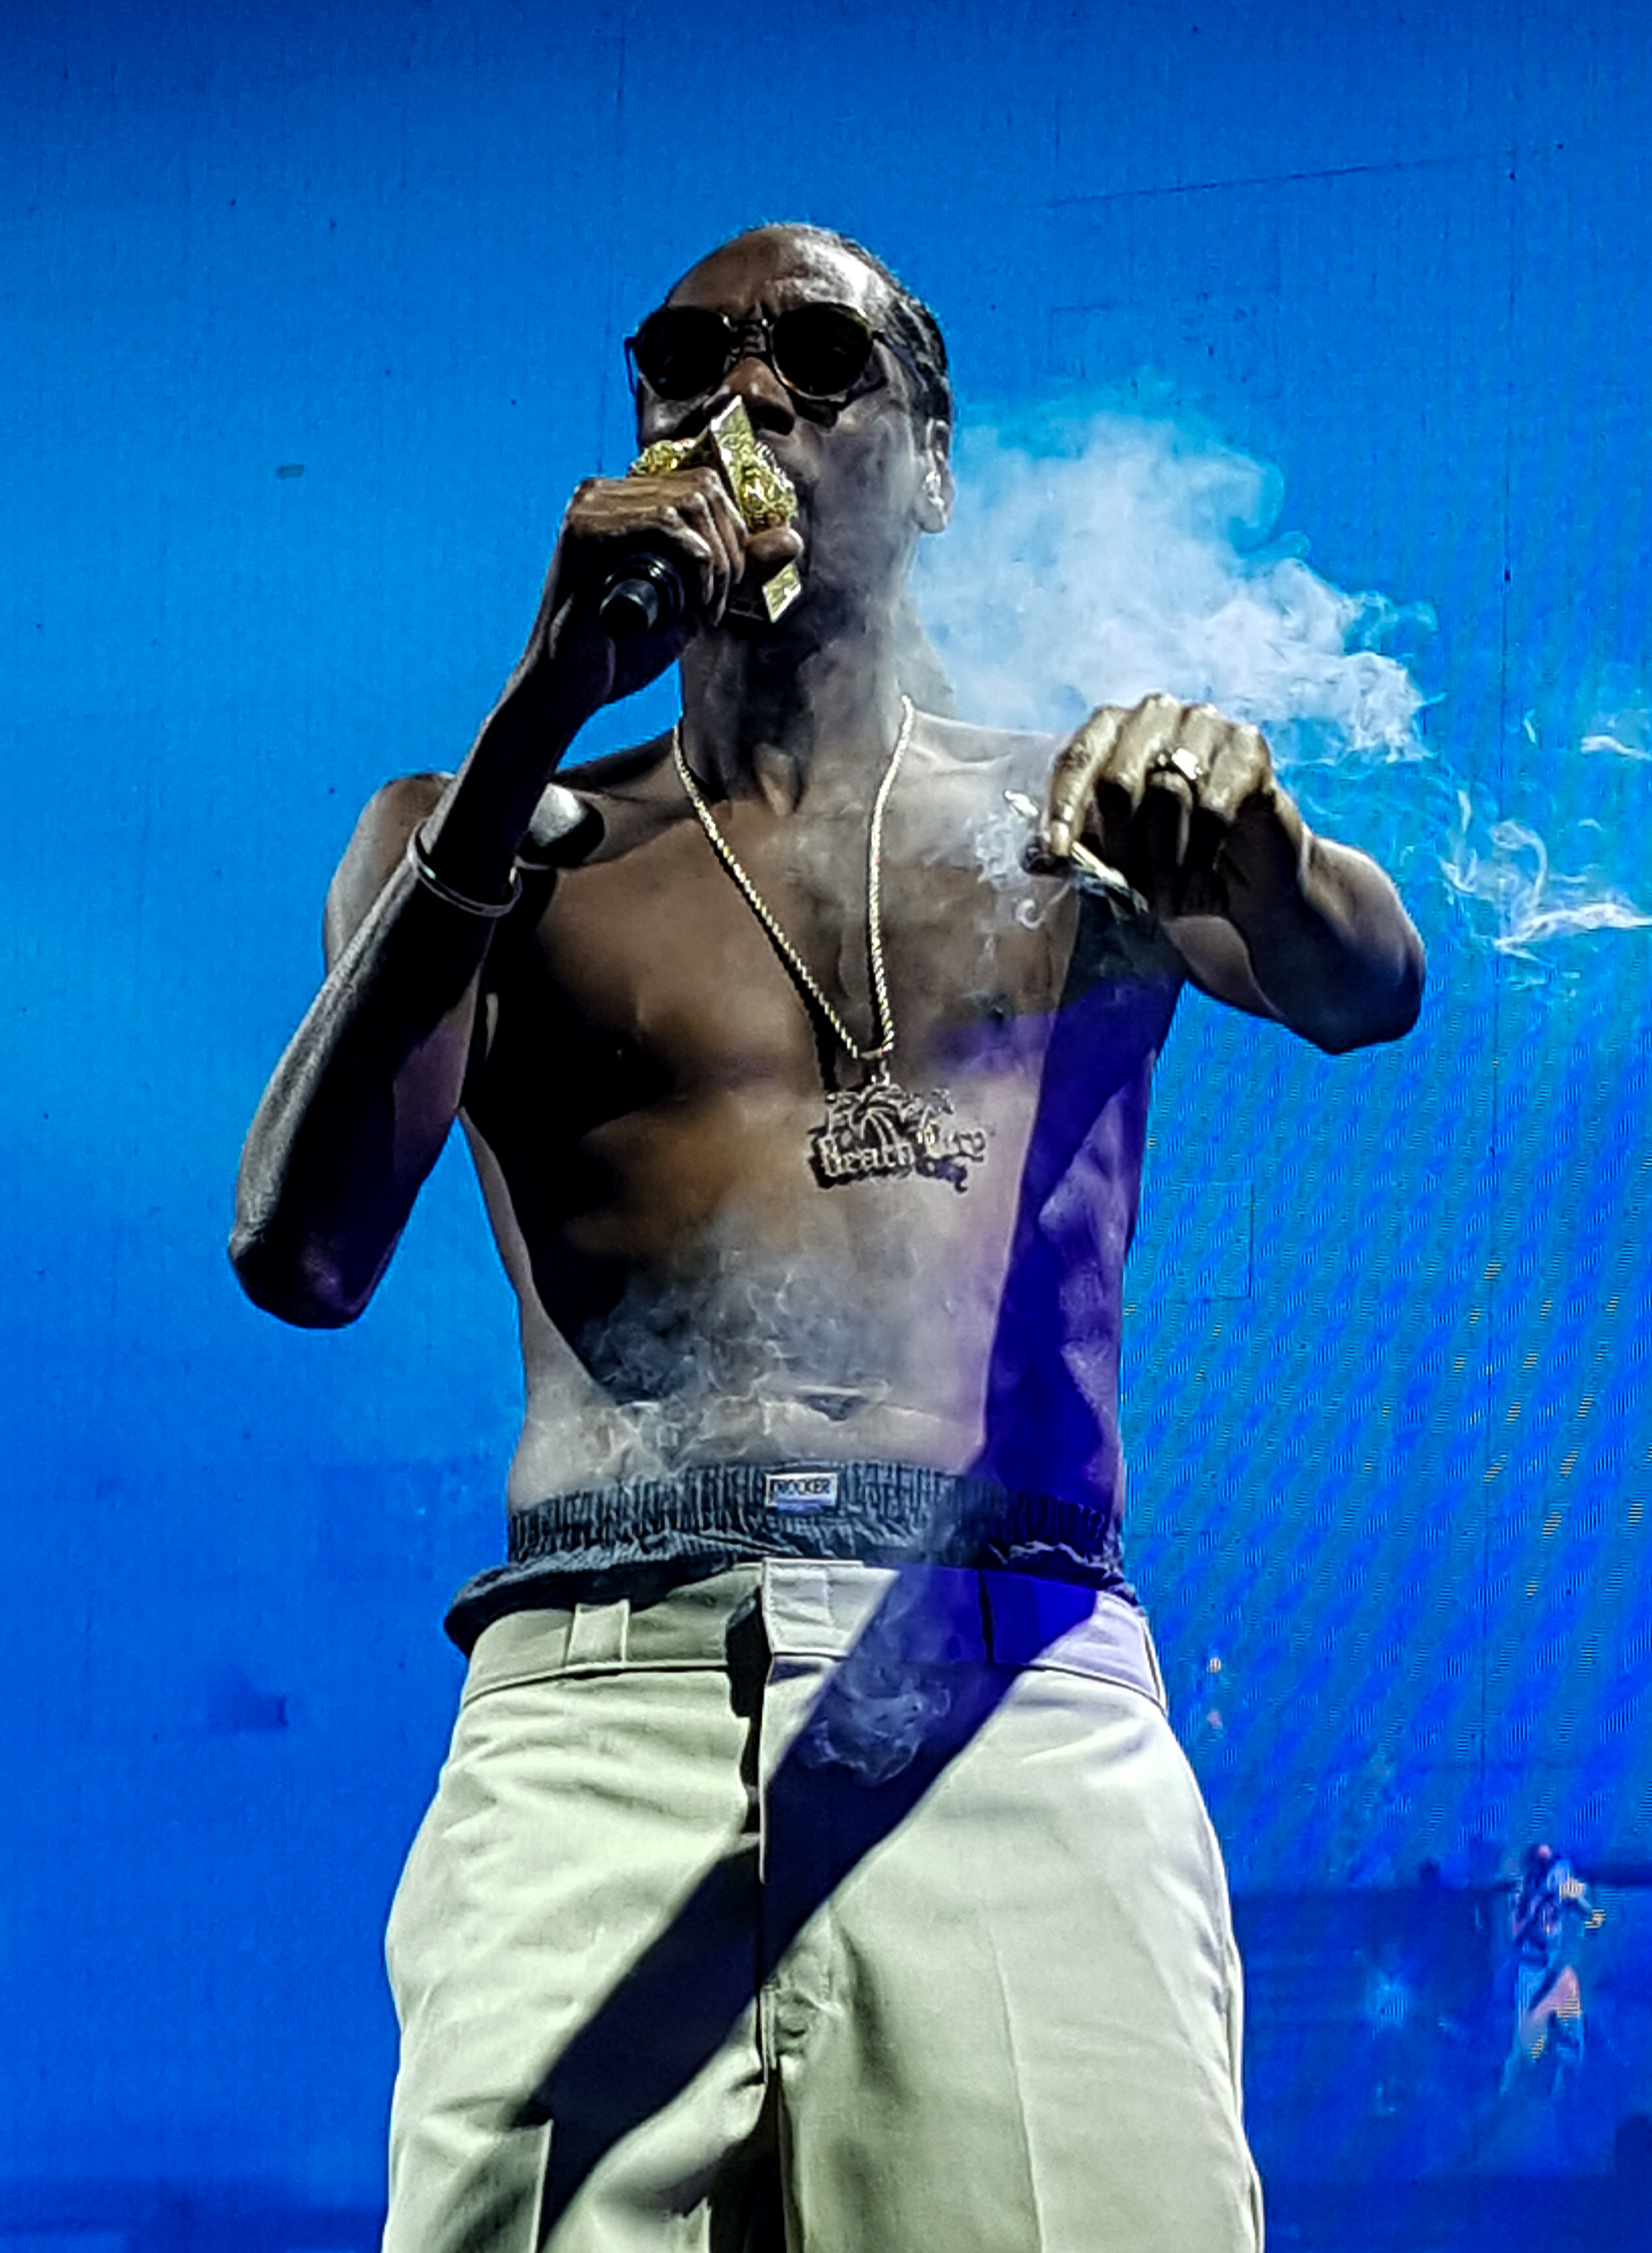 A shirtless Snoop Dogg smokes on stage on the High Road tour at Sleep Train Amphitheater in Chula Vista, CA